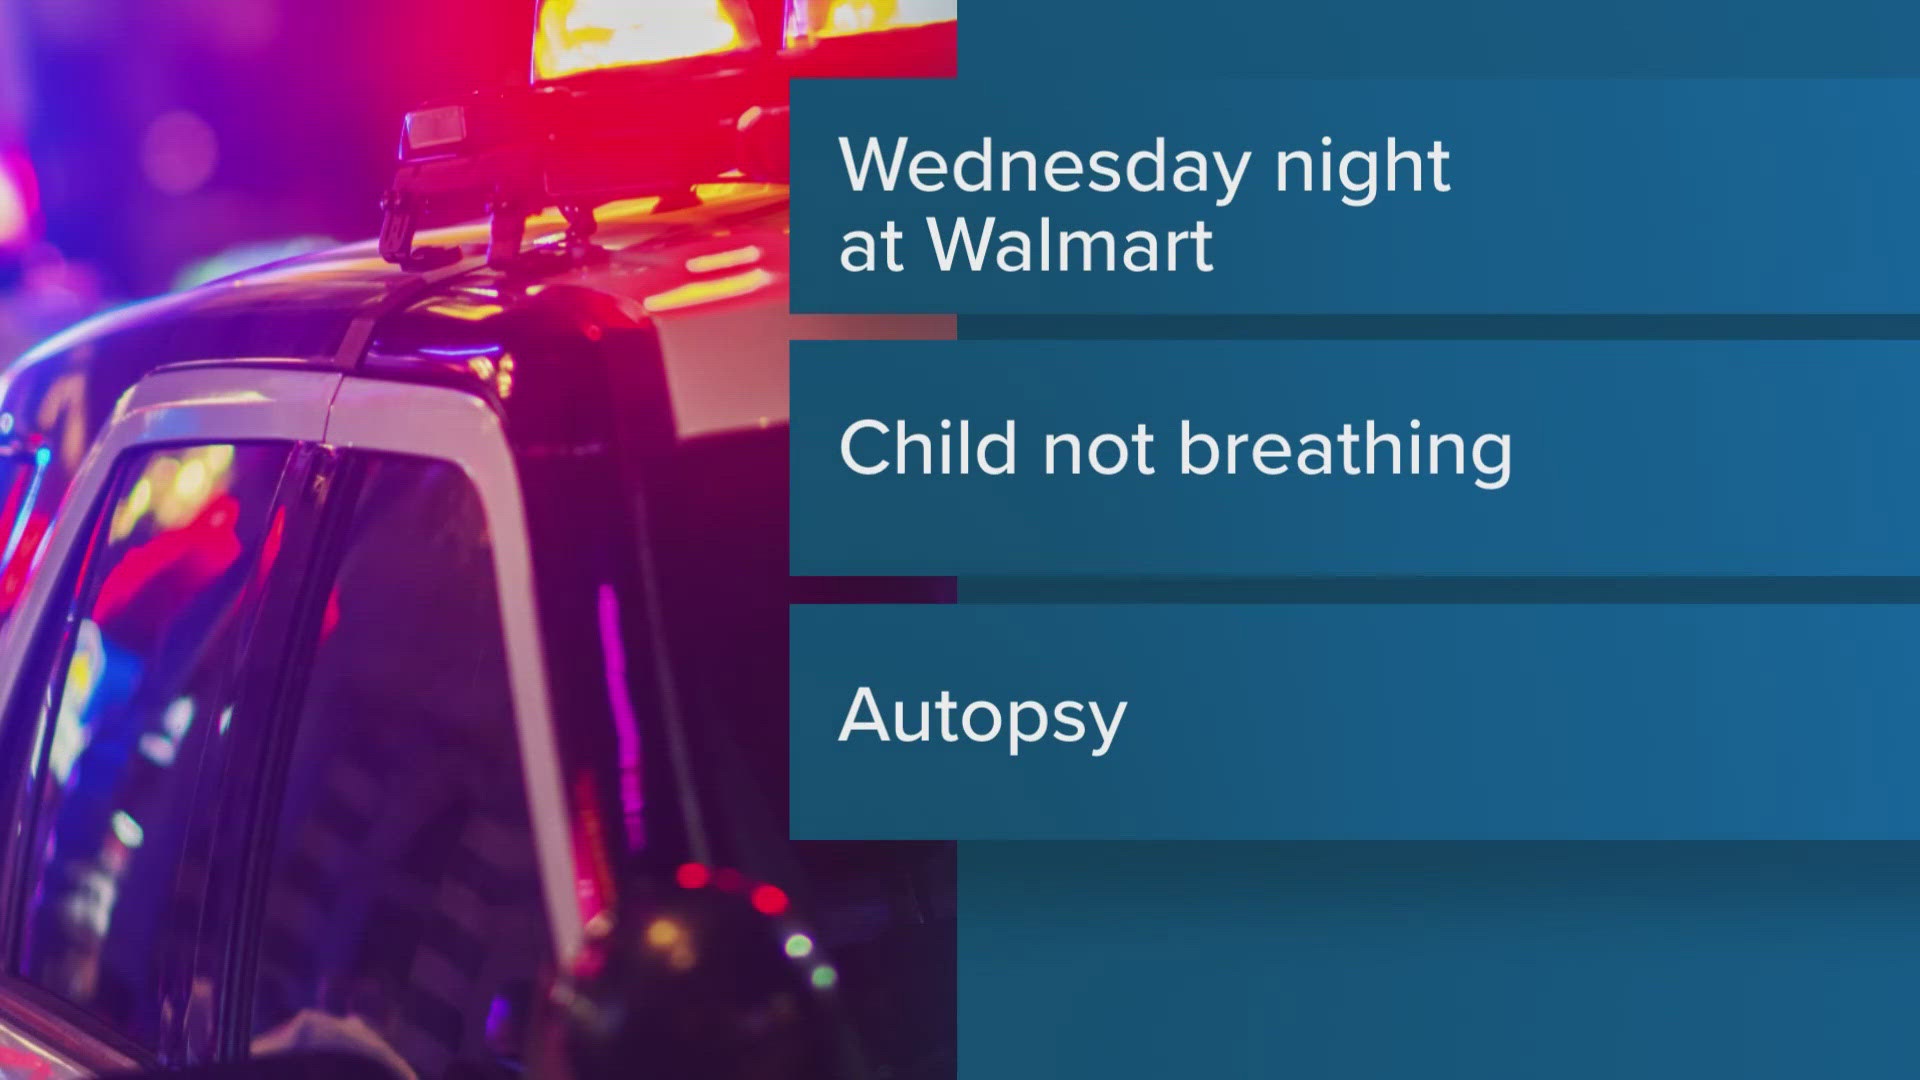 Thomaston police were called to Walmart around 7:30 p.m. Wednesday about a 22-month-old child who was not breathing.